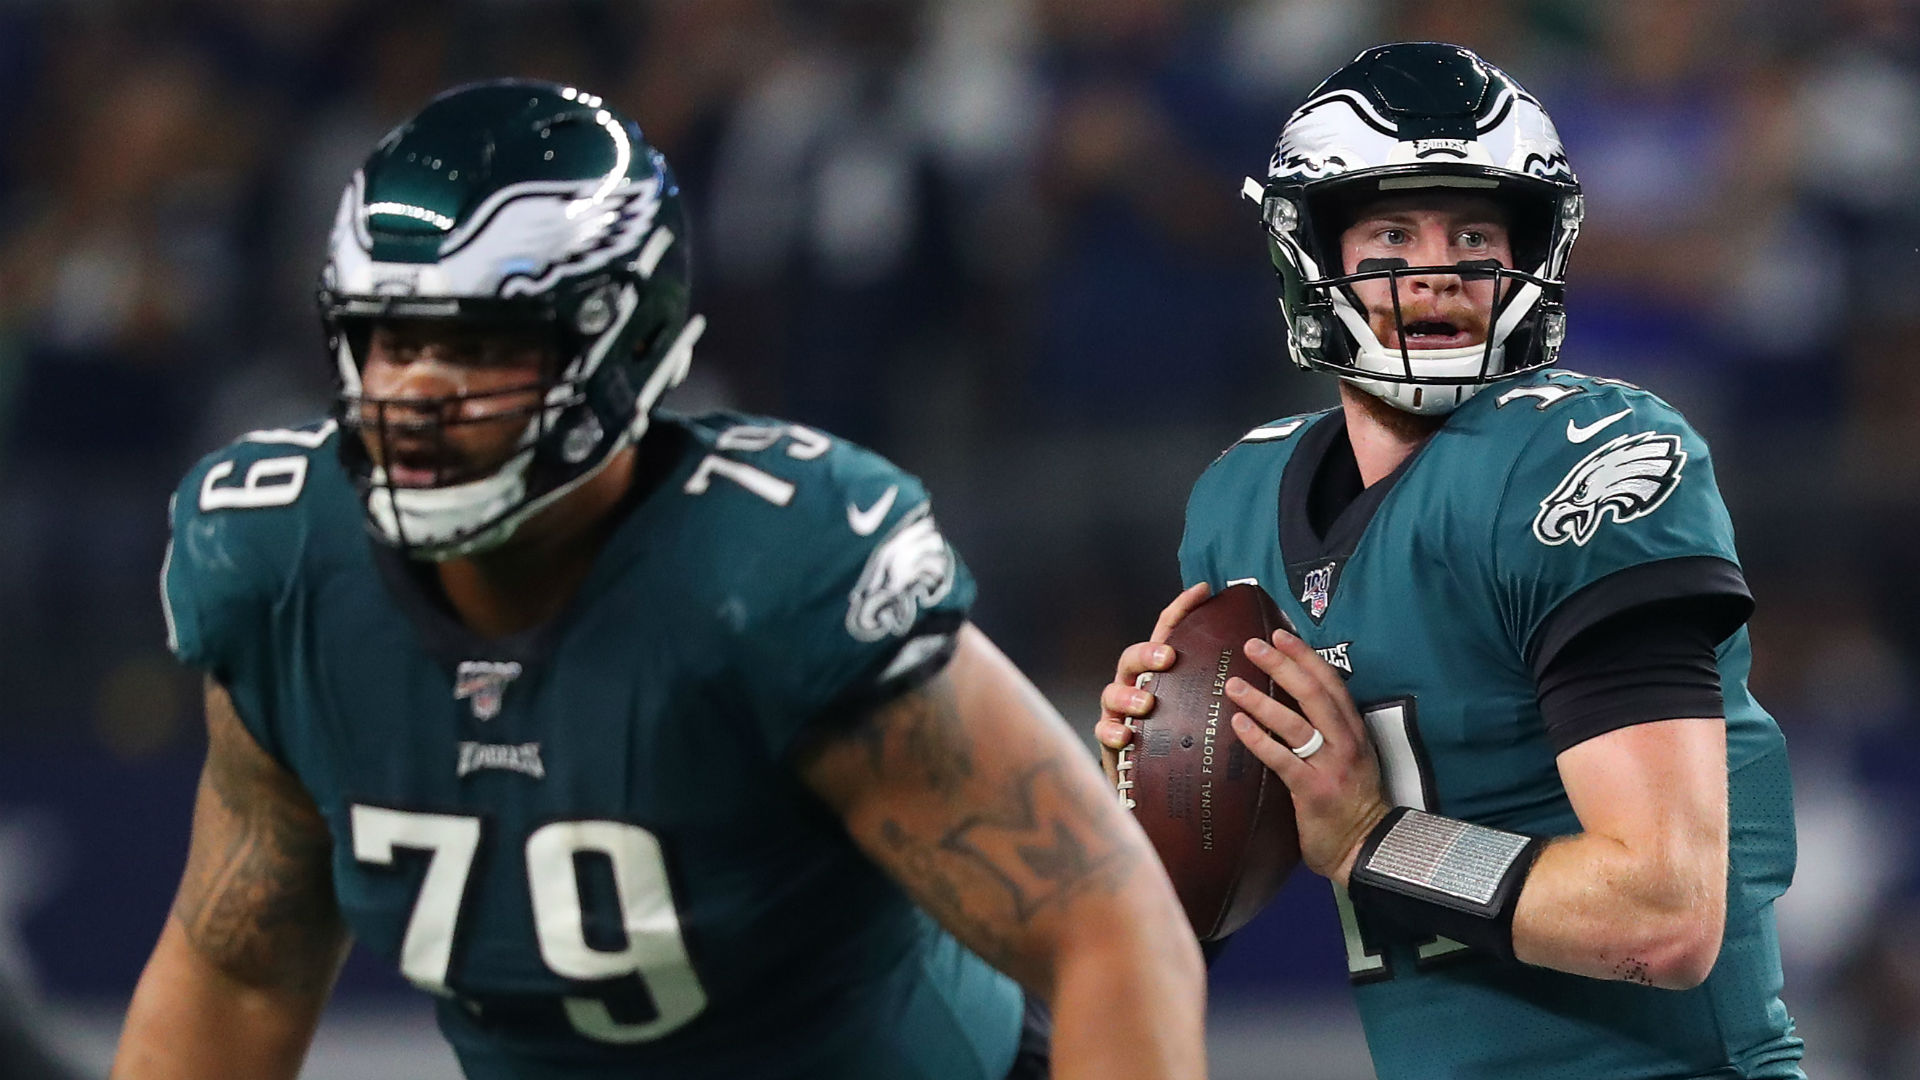 The Philadelphia Eagles have reportedly made Brandon Brooks the NFL's highest-paid guard, after the 30-year-old signed a new contract.